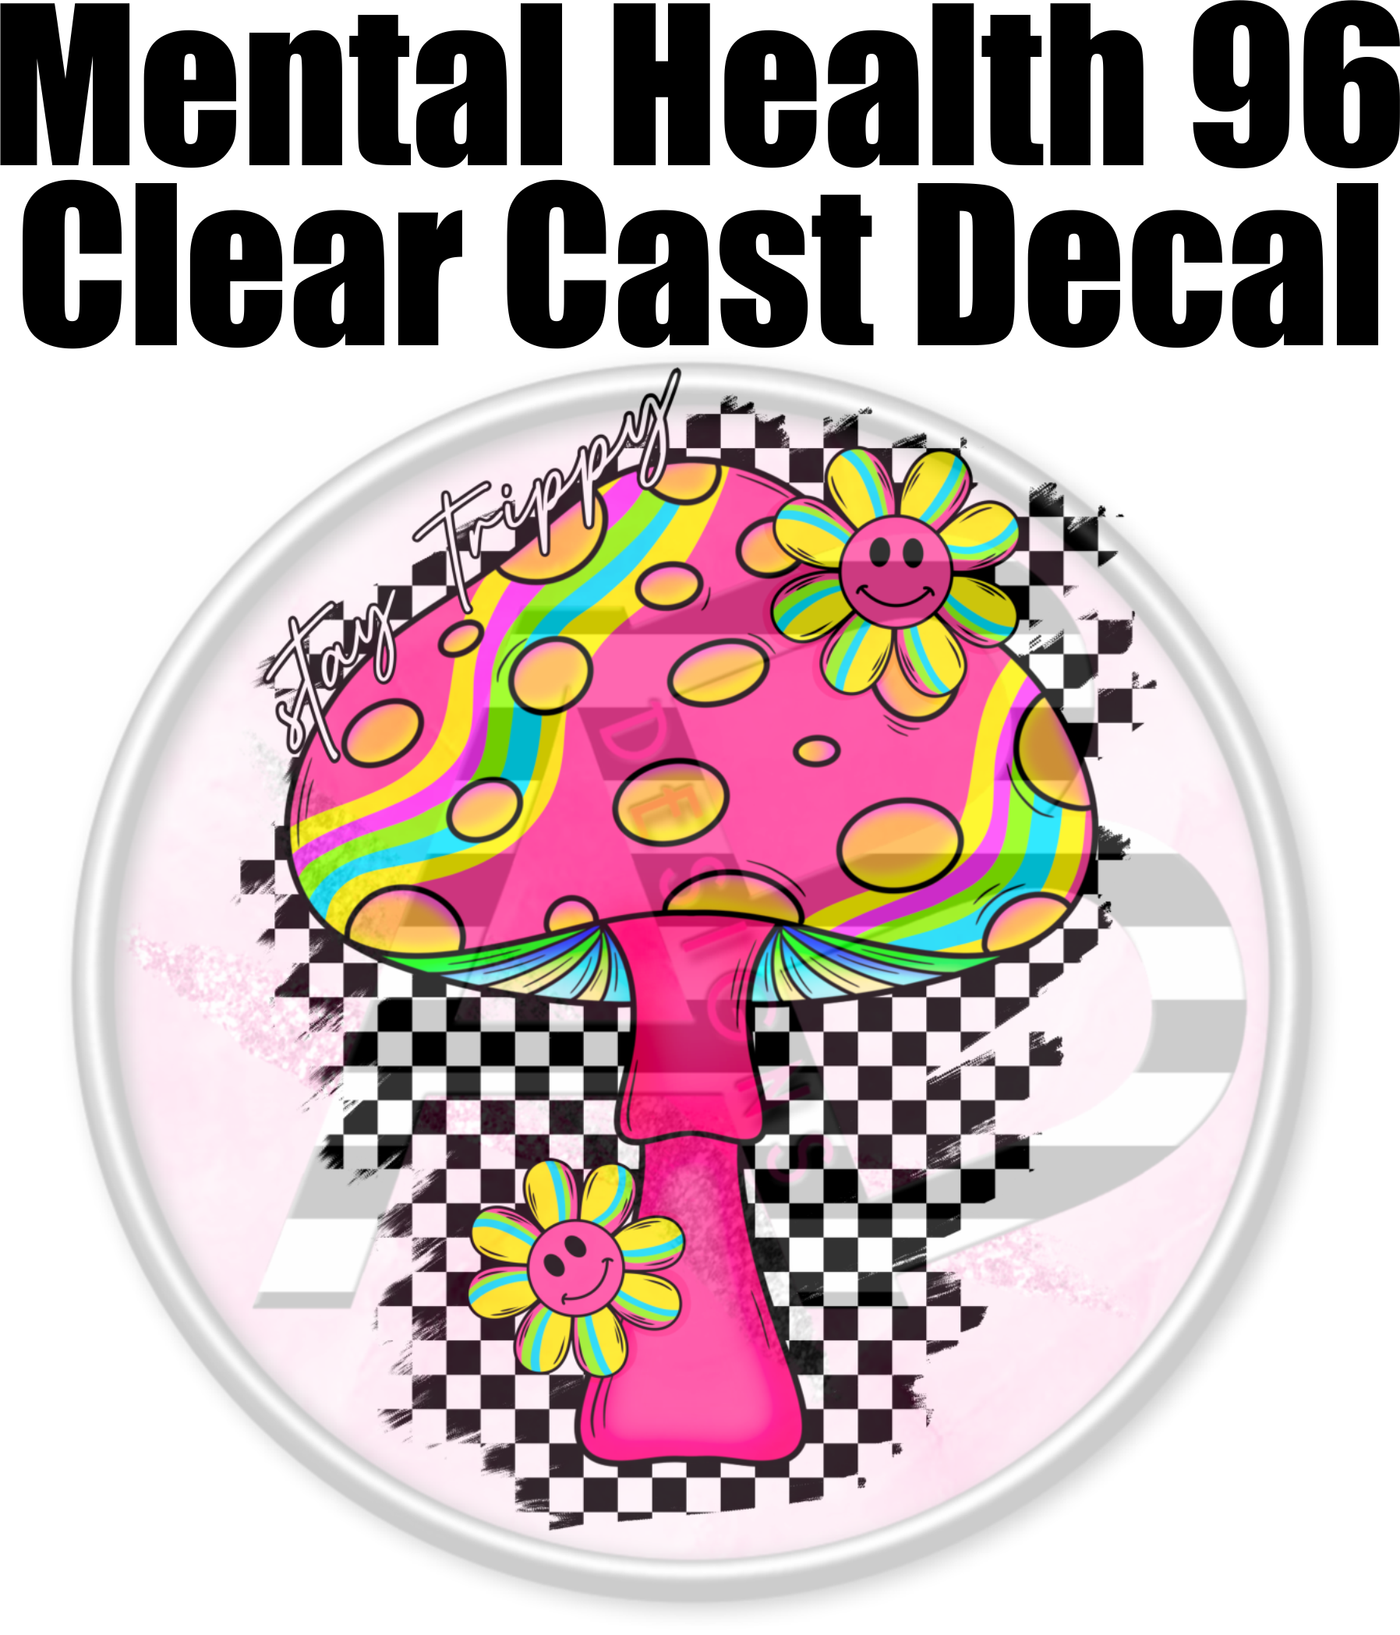 Mental Health 96 - Clear Cast Decal-565